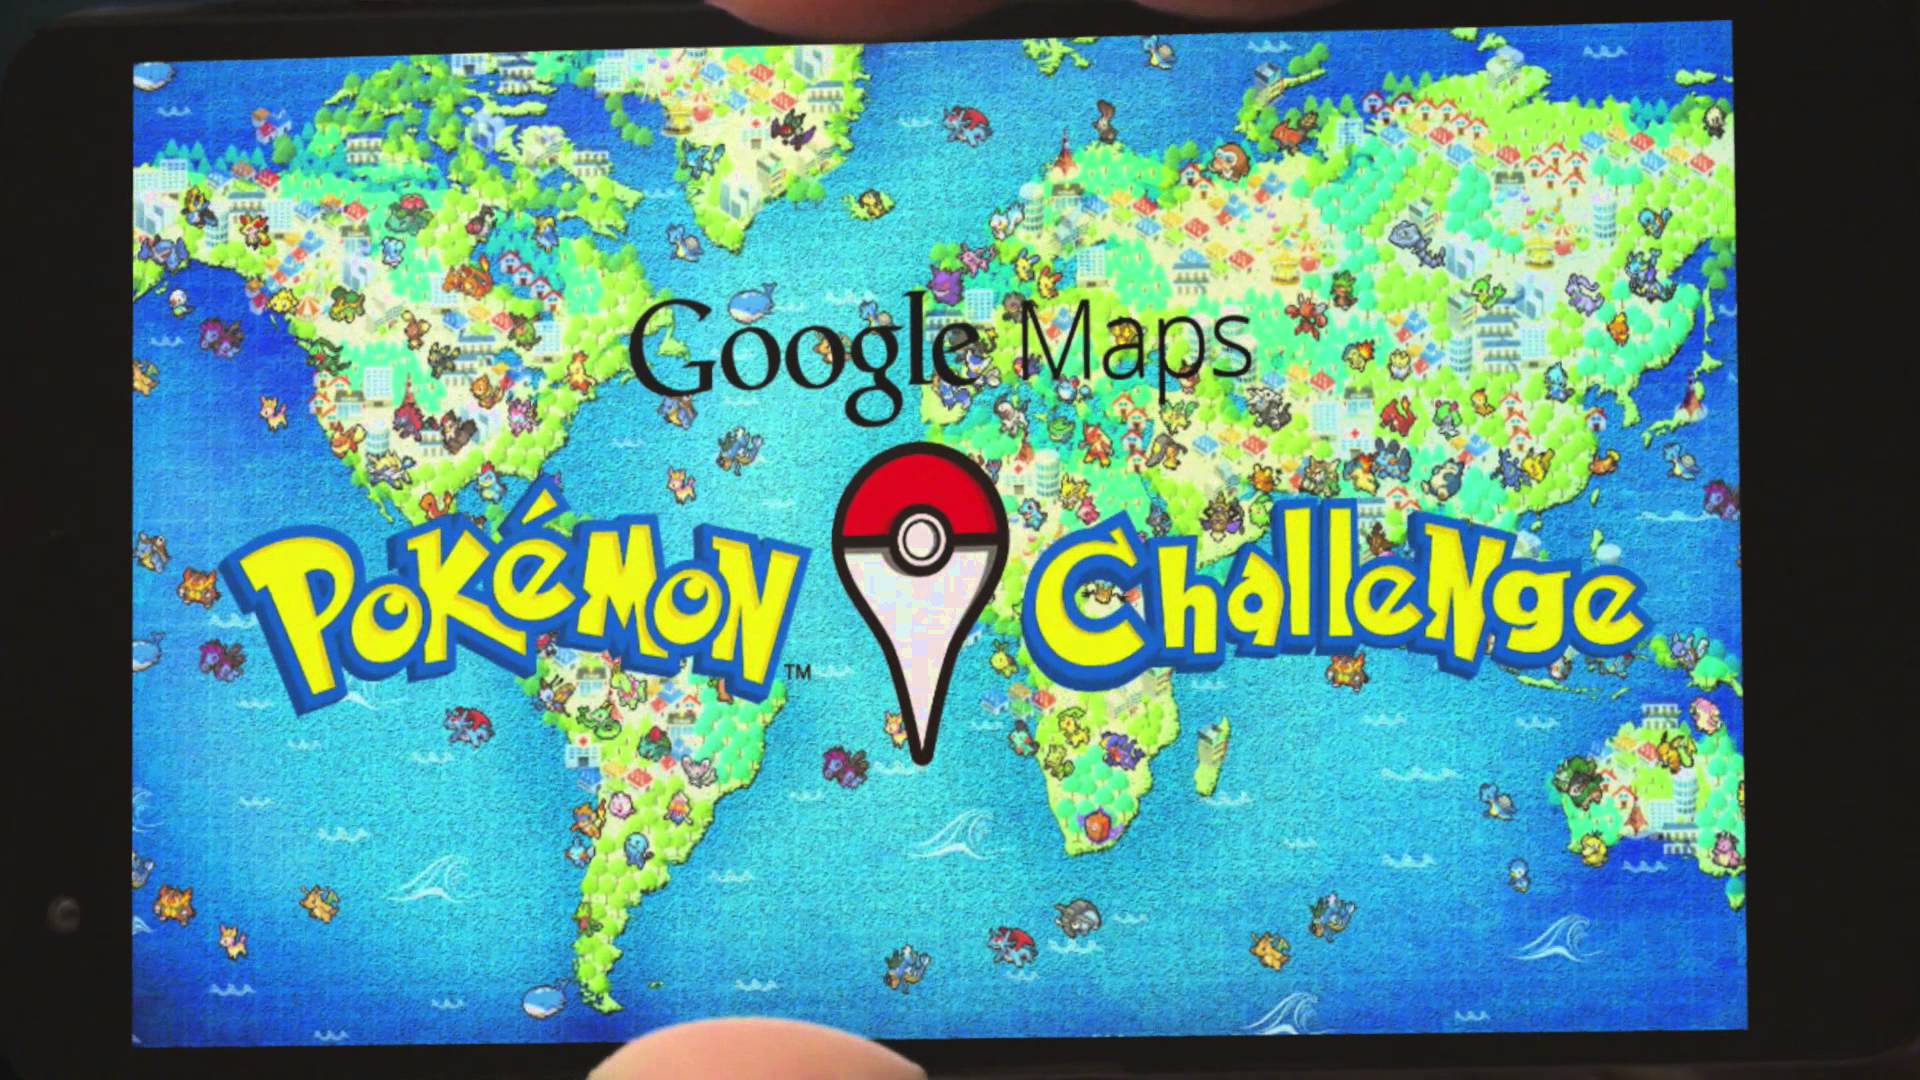 Geek insider, geekinsider, geekinsider. Com,, pokemon april fools prank by the google maps team, living